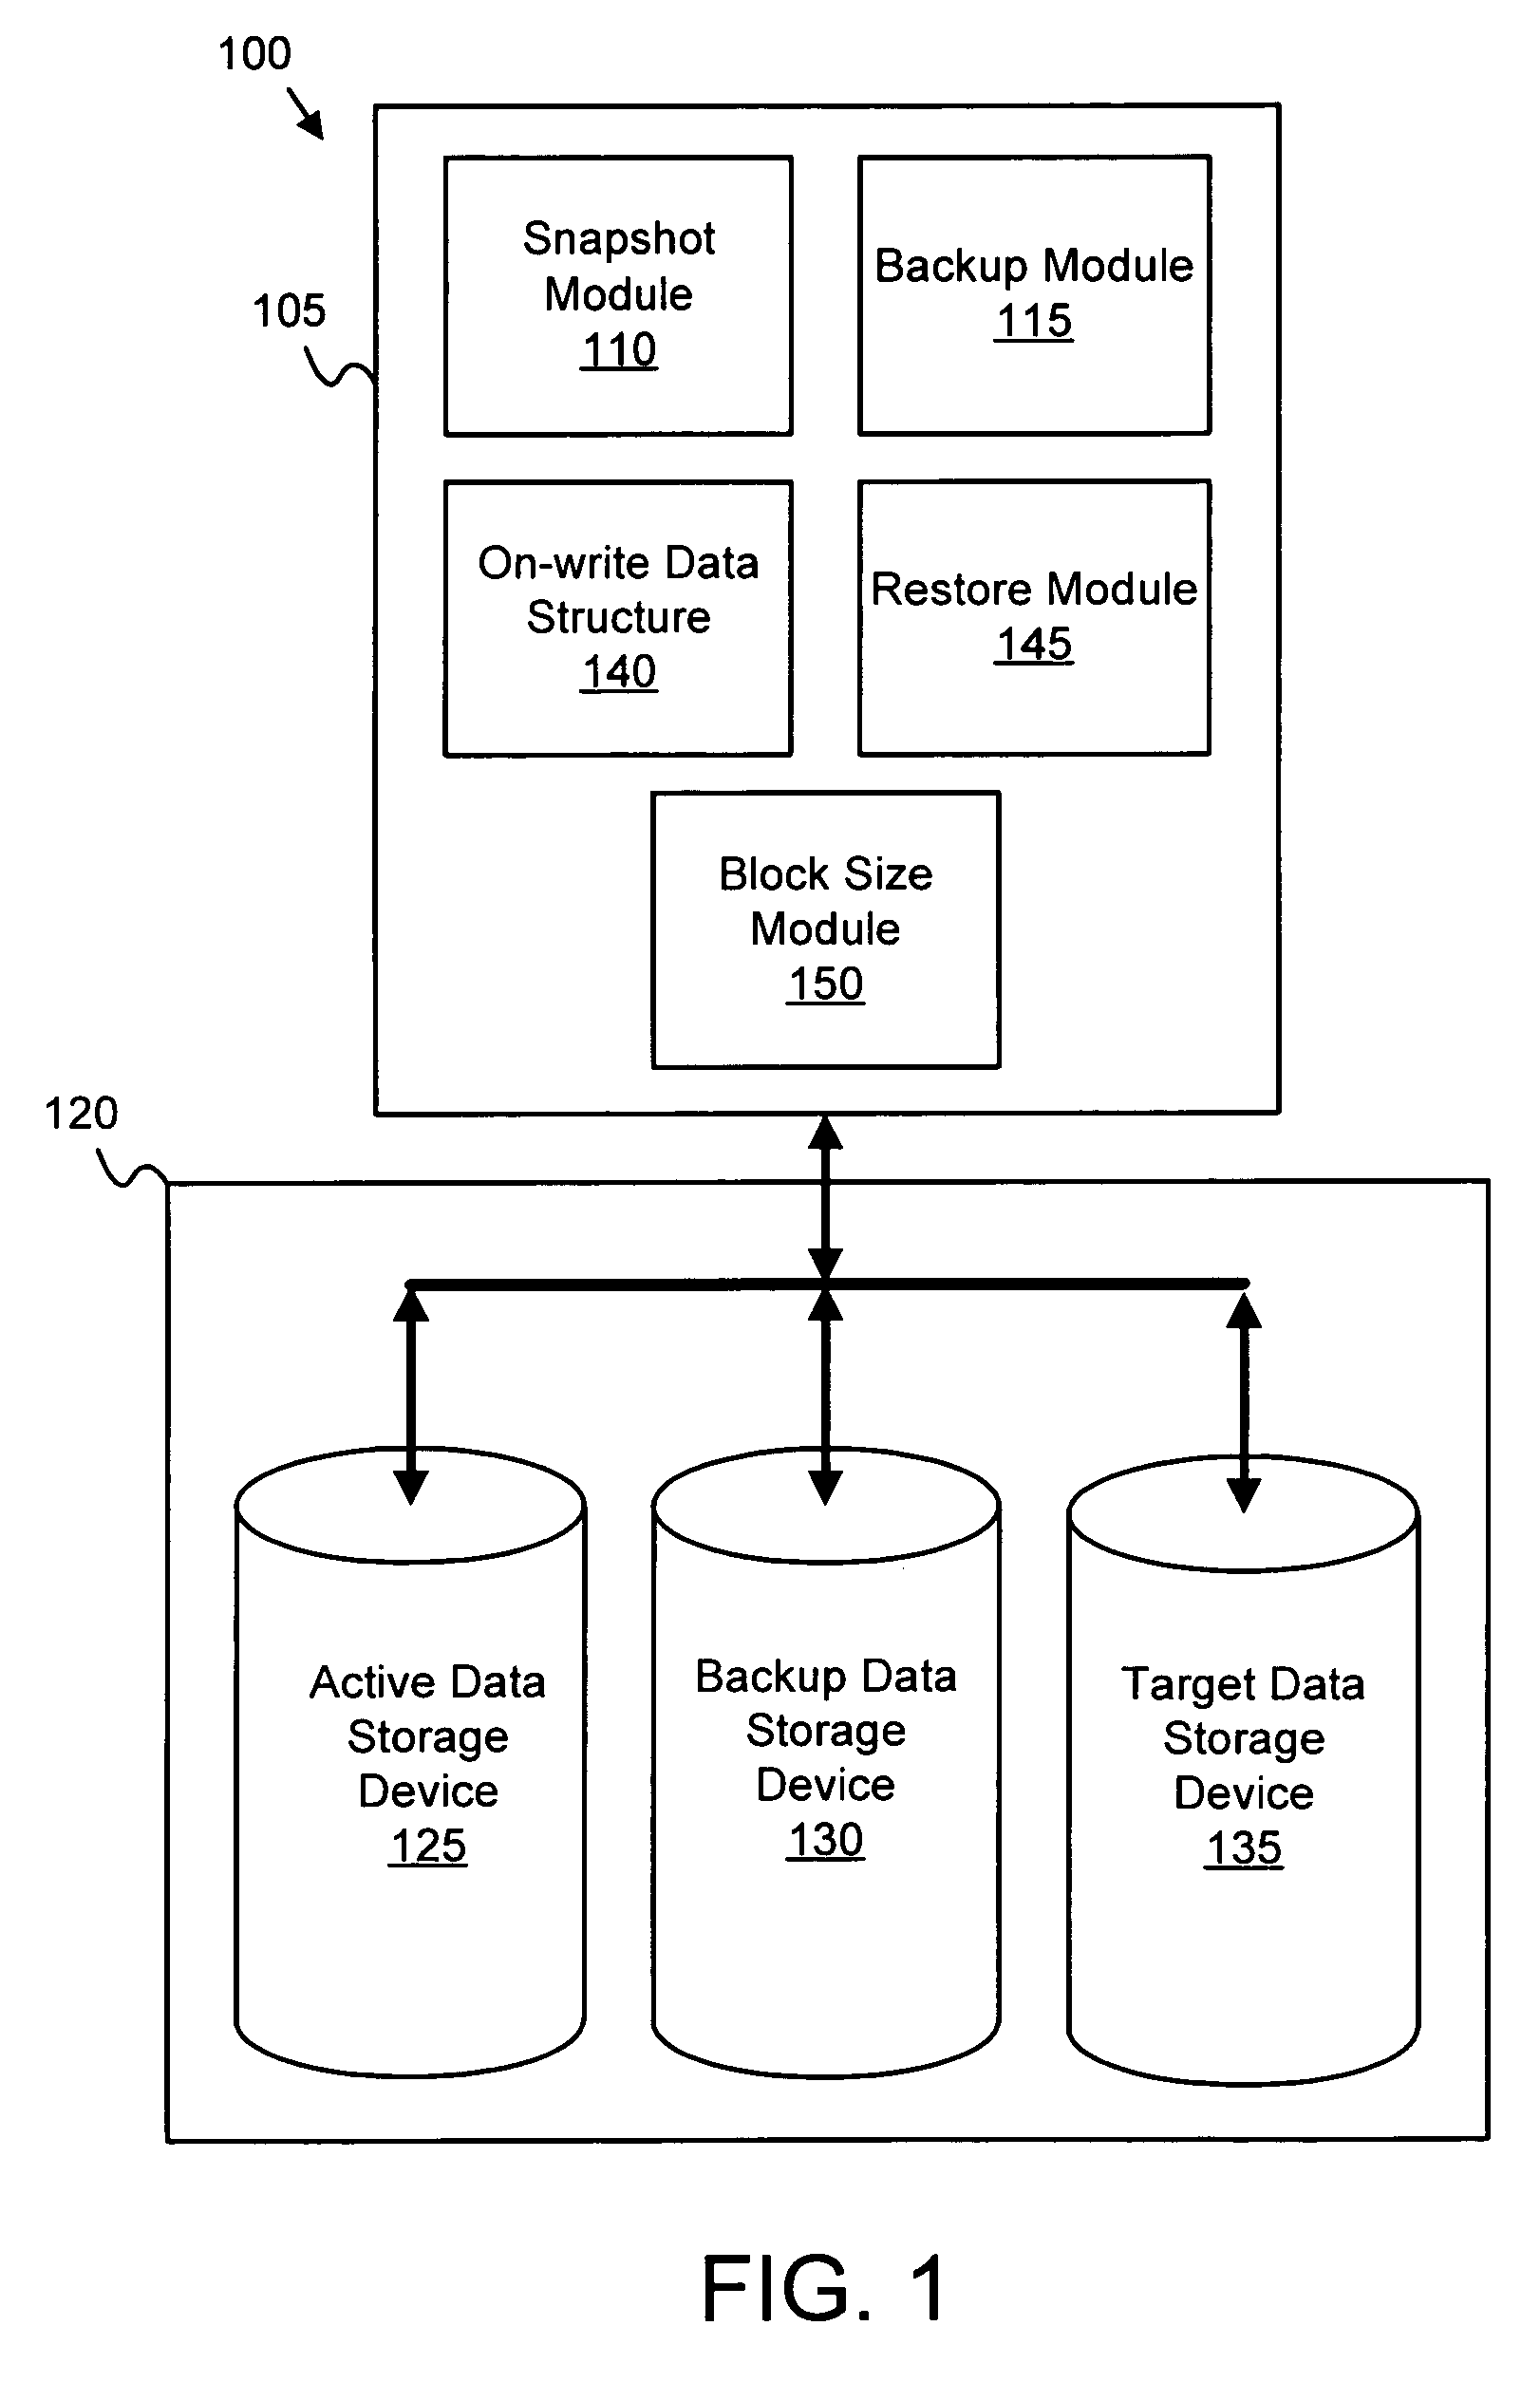 Apparatus, system, and method for differential backup using snapshot on-write data